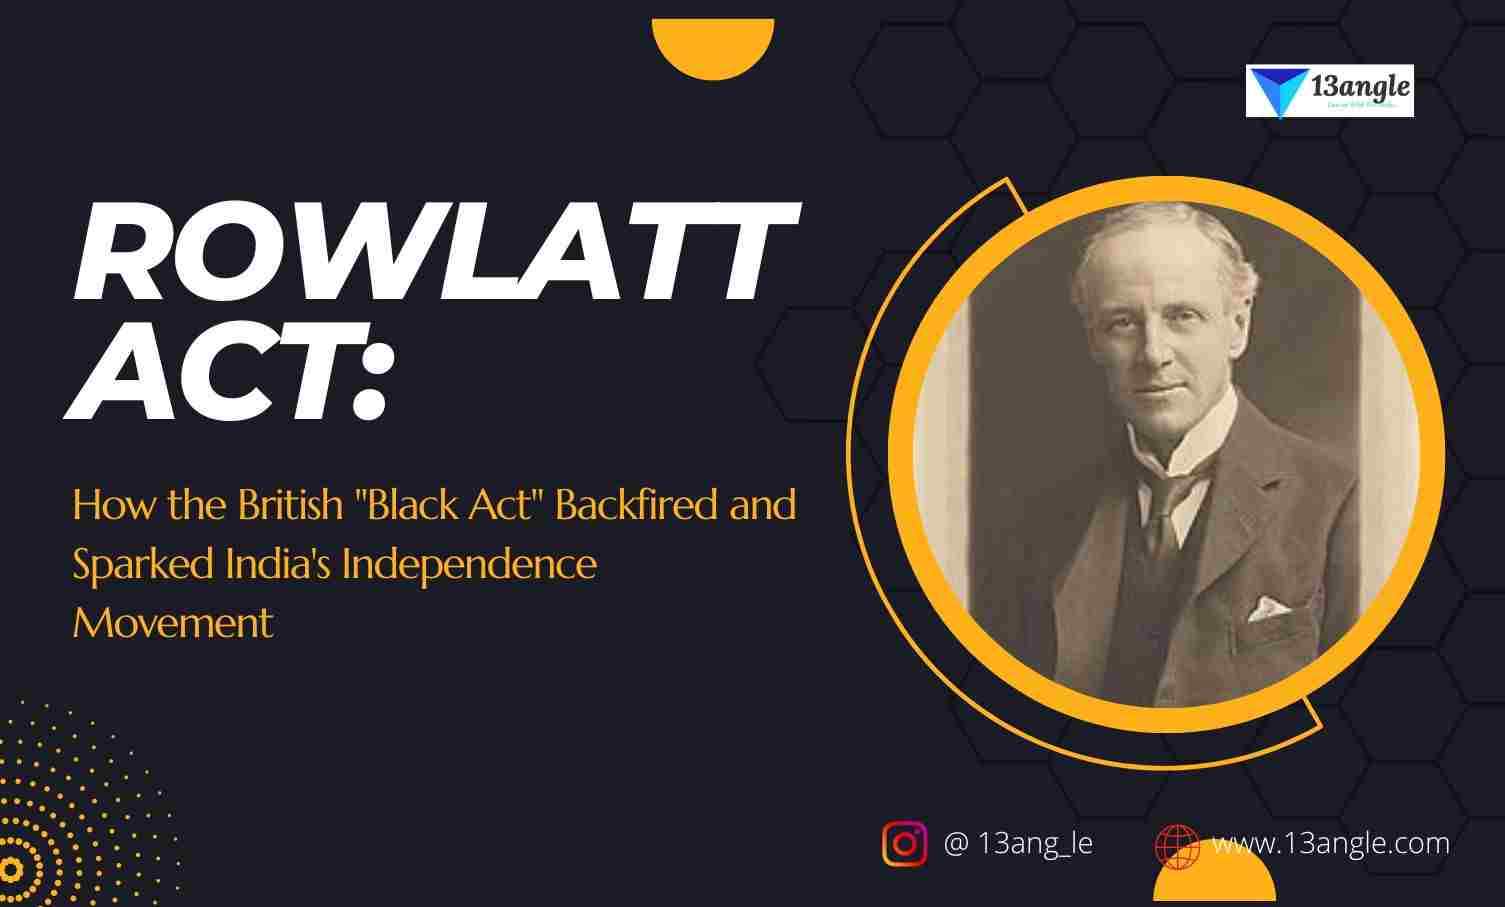 Rowlatt Act How the British Black Act Backfired and Sparked India's Independence Movement- 13angle.com